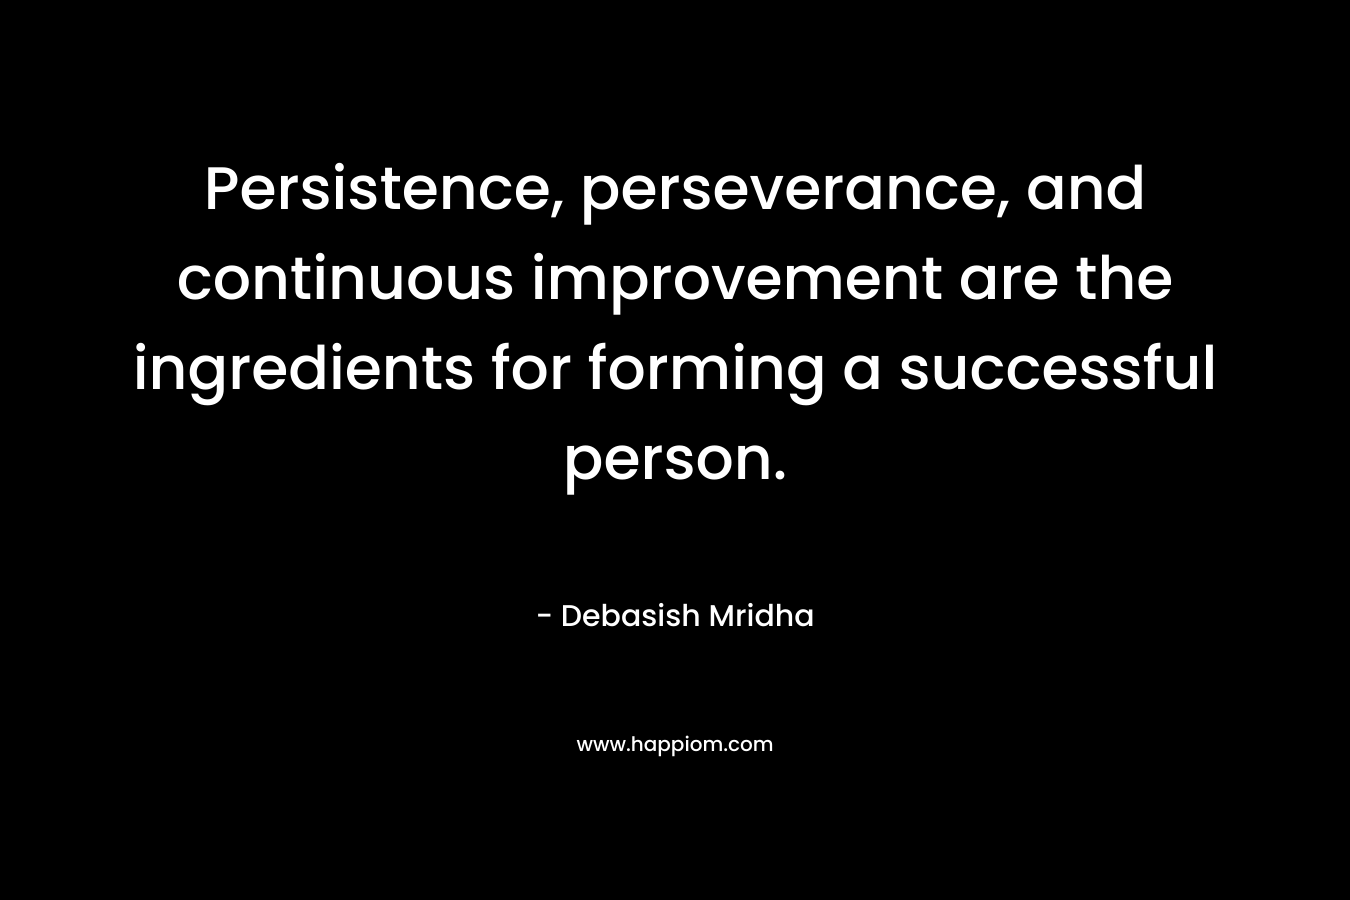 Persistence, perseverance, and continuous improvement are the ingredients for forming a successful person. – Debasish Mridha